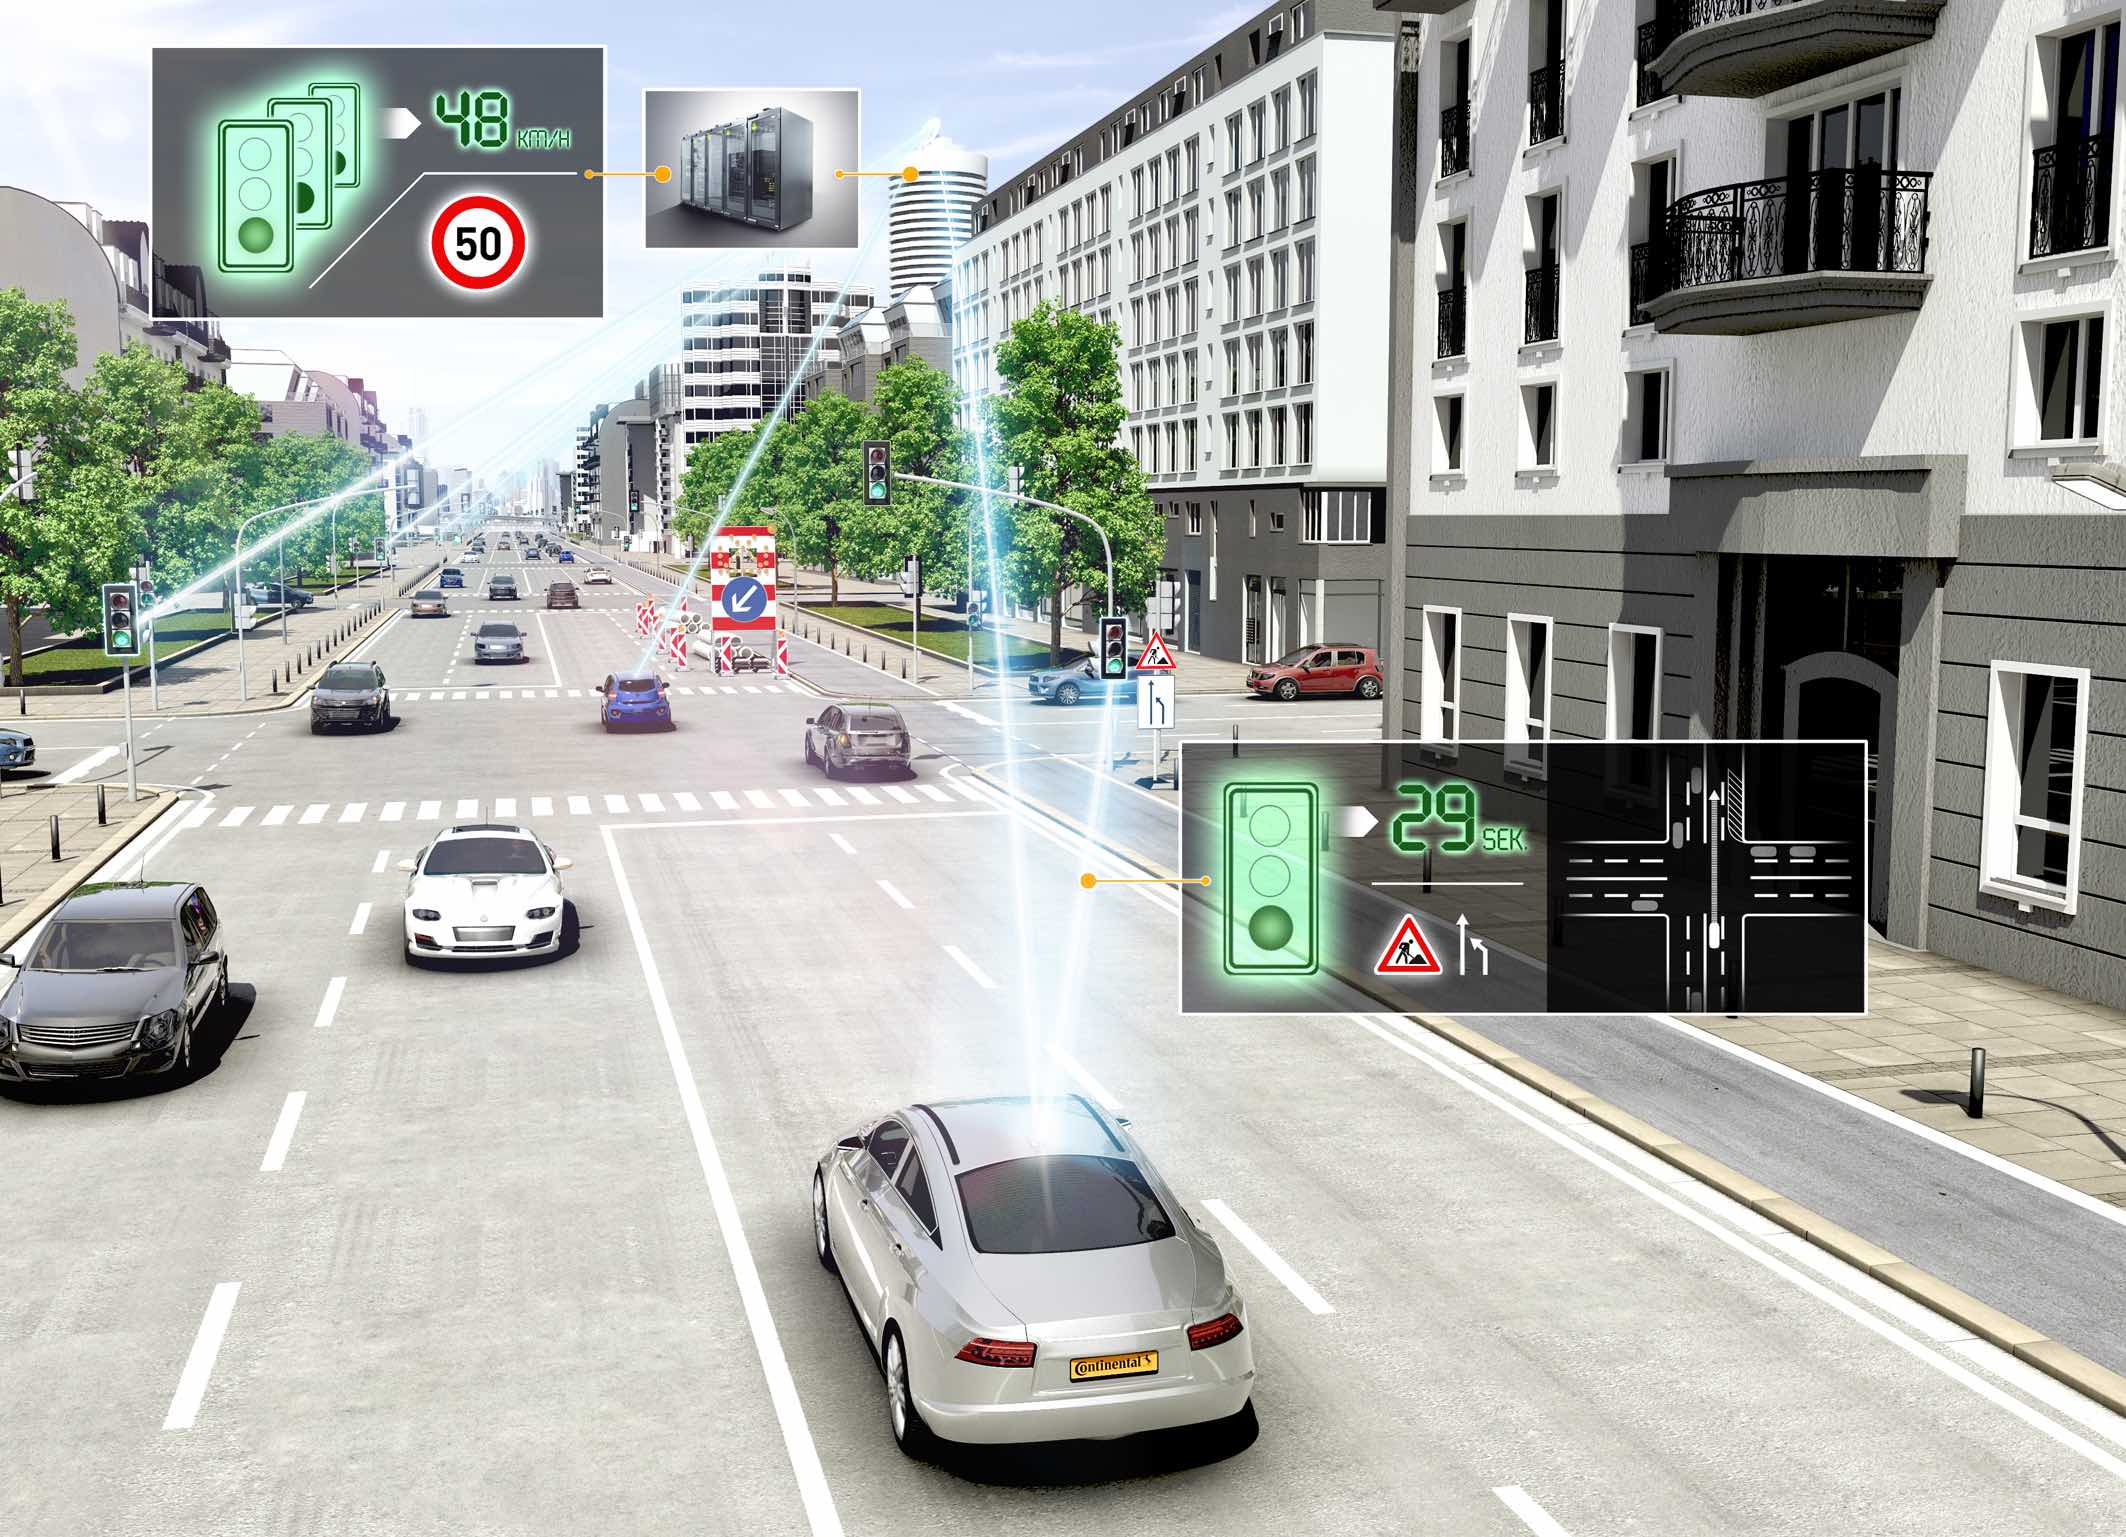 The connected car is coming soon to a motorway near you